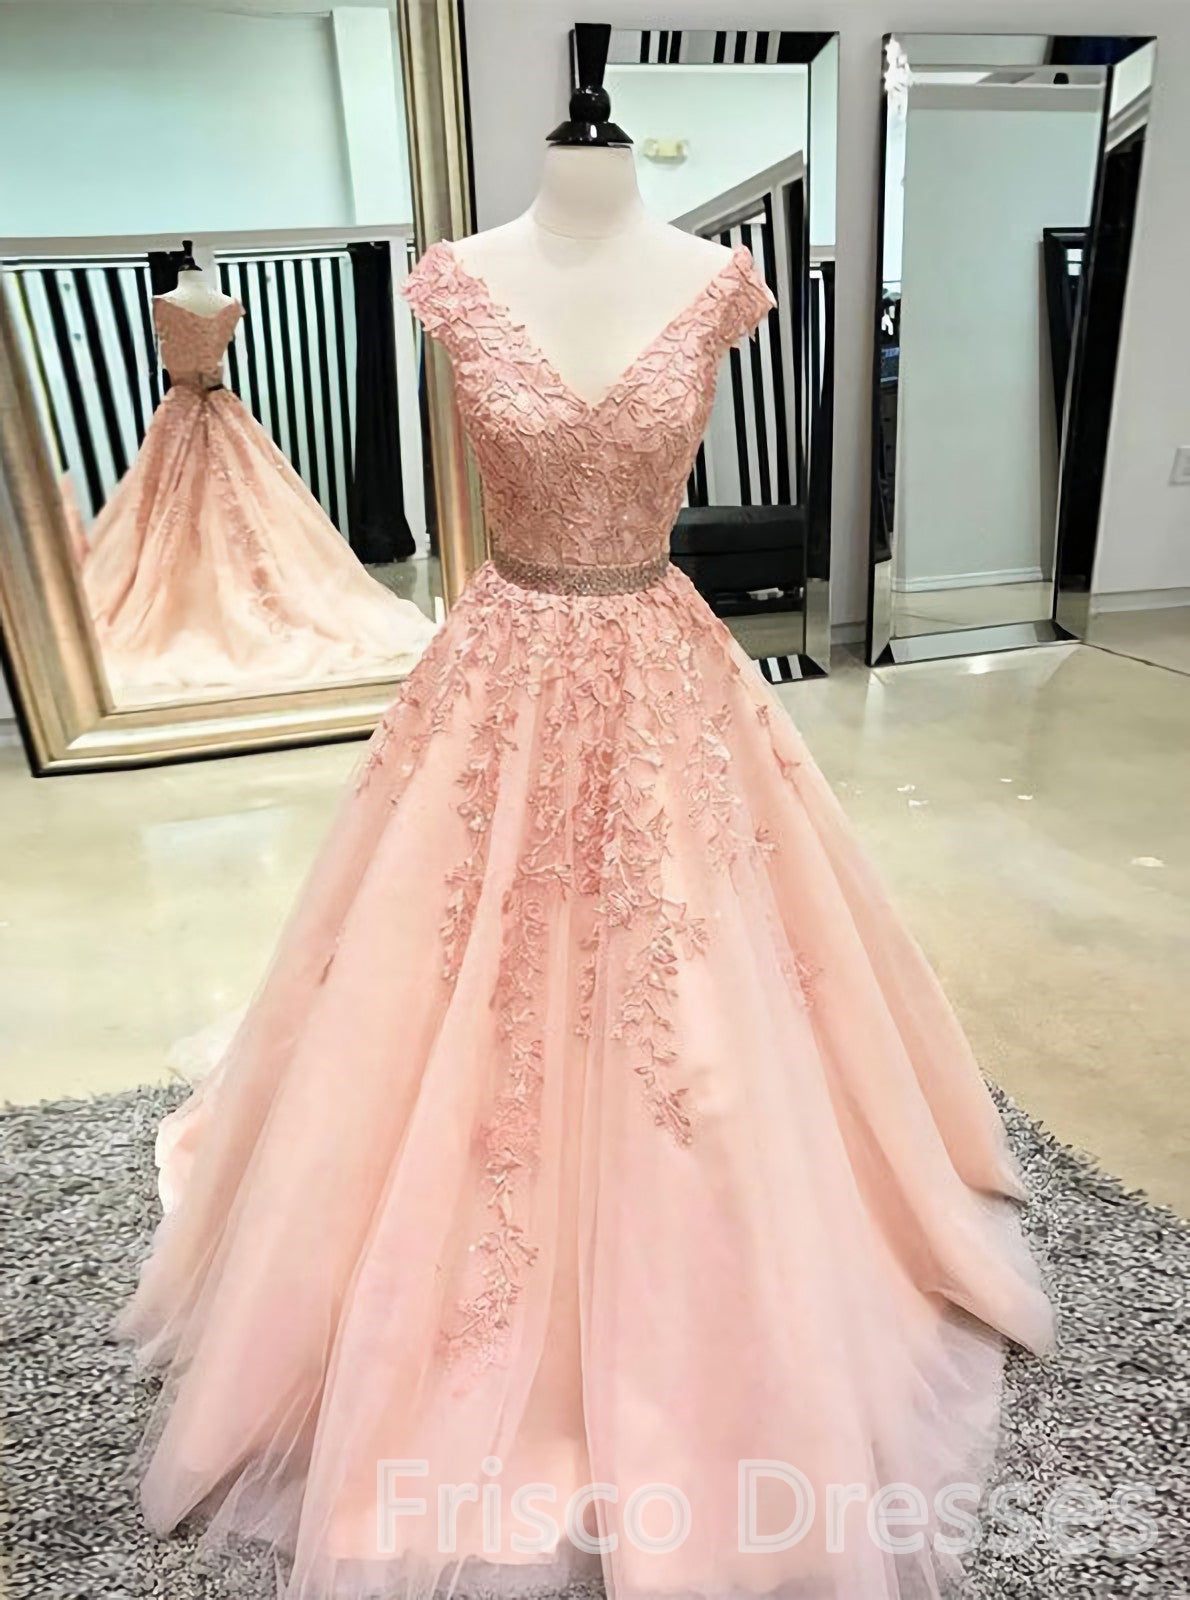 Homecomeing Dresses Long, Pink Sleeveless V Neck Tulle Lace Applique Long Prom Dresses